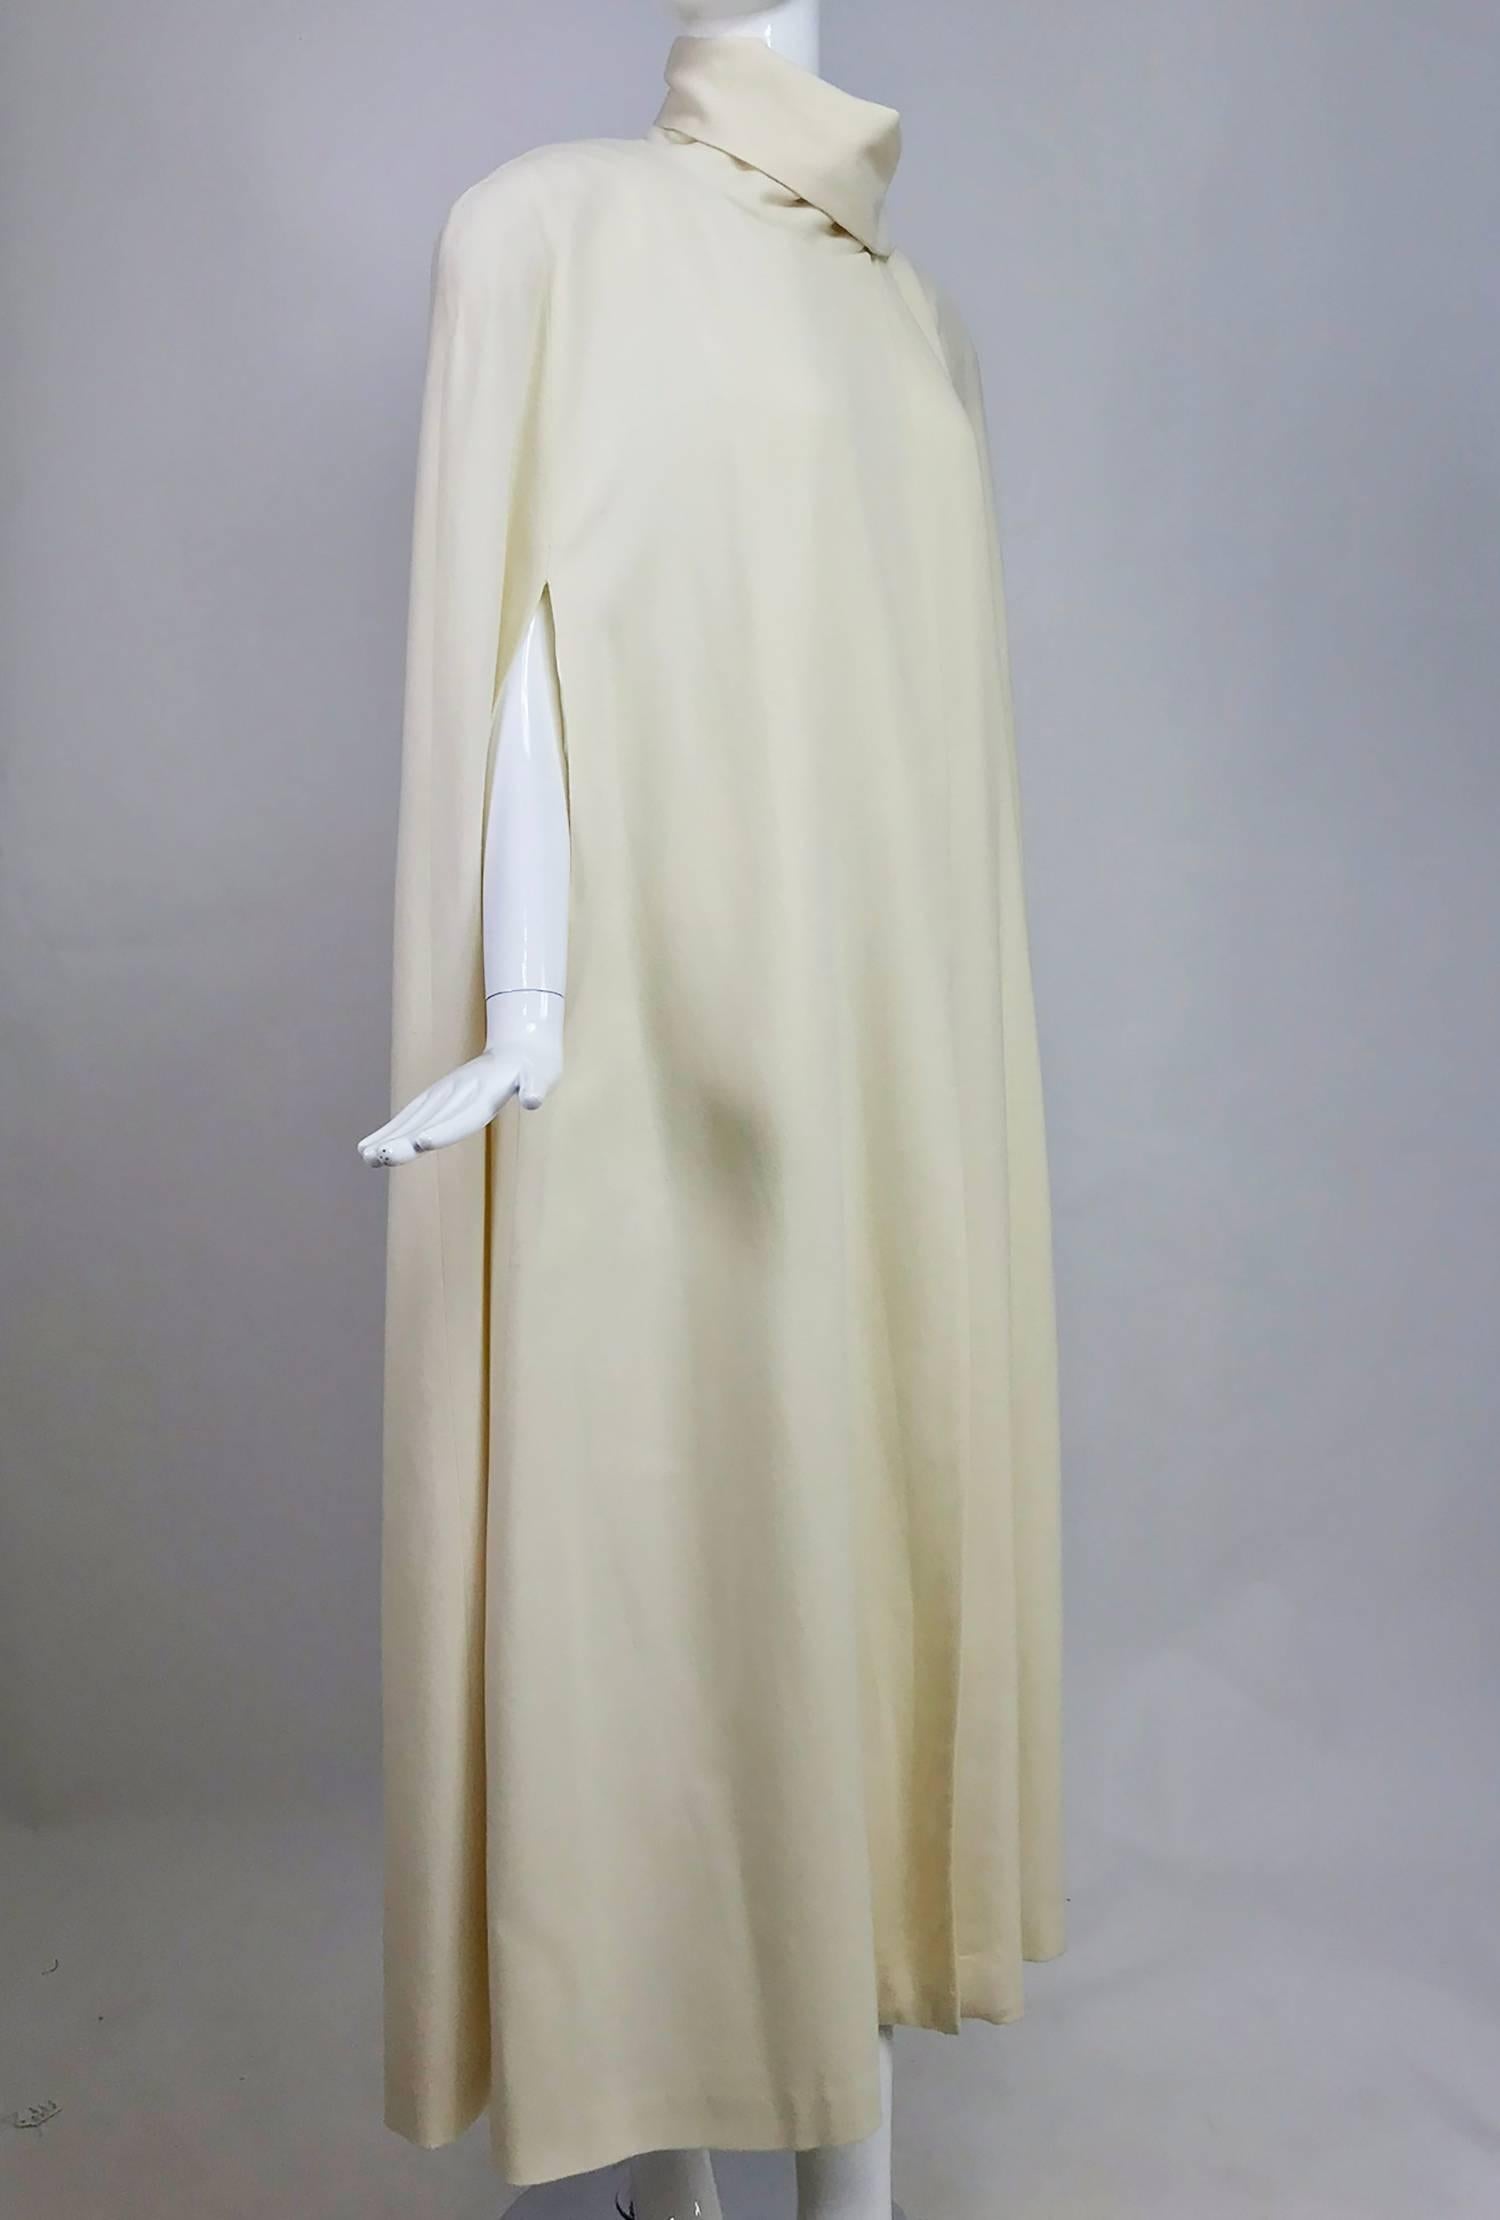 Winter white full length wool cape from the 1980s...Perfect for evening or daytime...Long A line shape cape closes with hidden snaps at the neck side front, there is an attached self scarf that can be wrapped around the neck or thrown over the